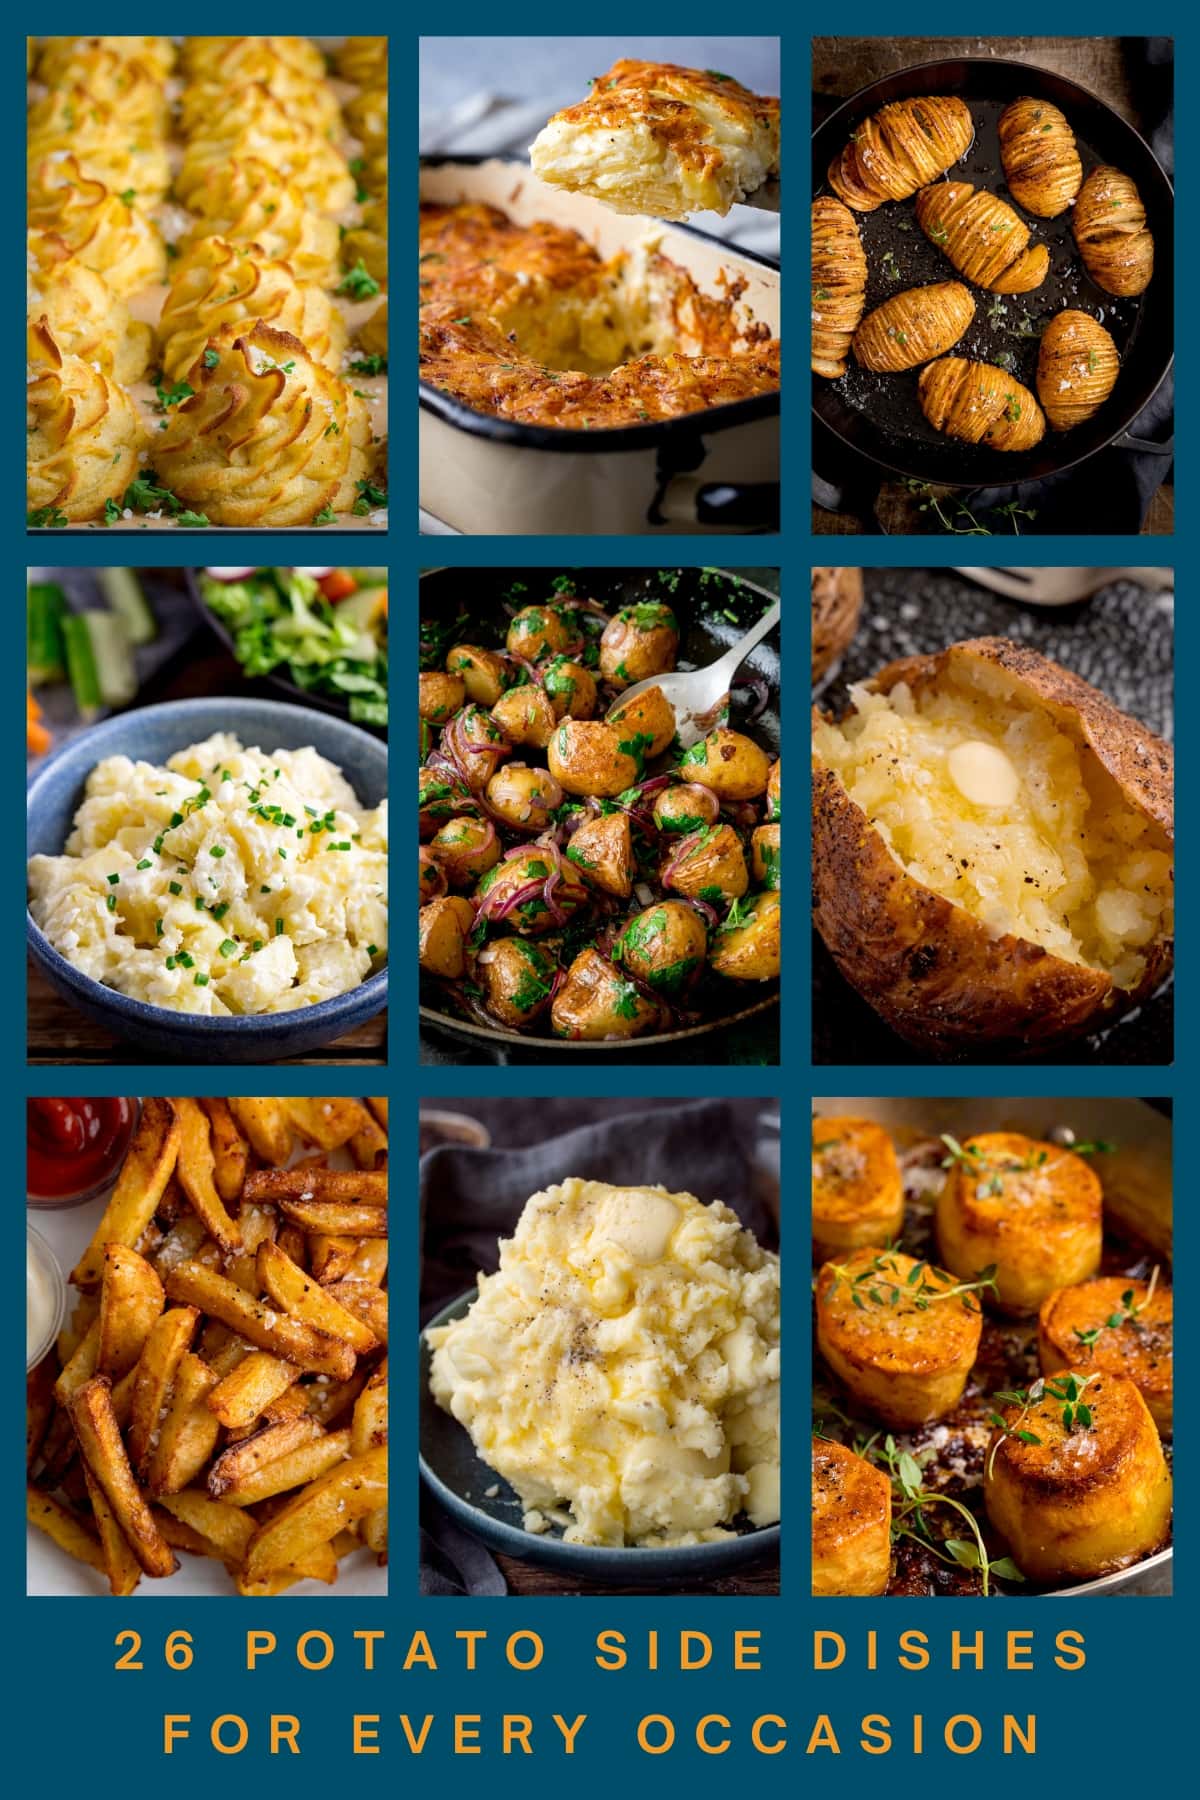 A collage of 9 images showing different potato side dishes.